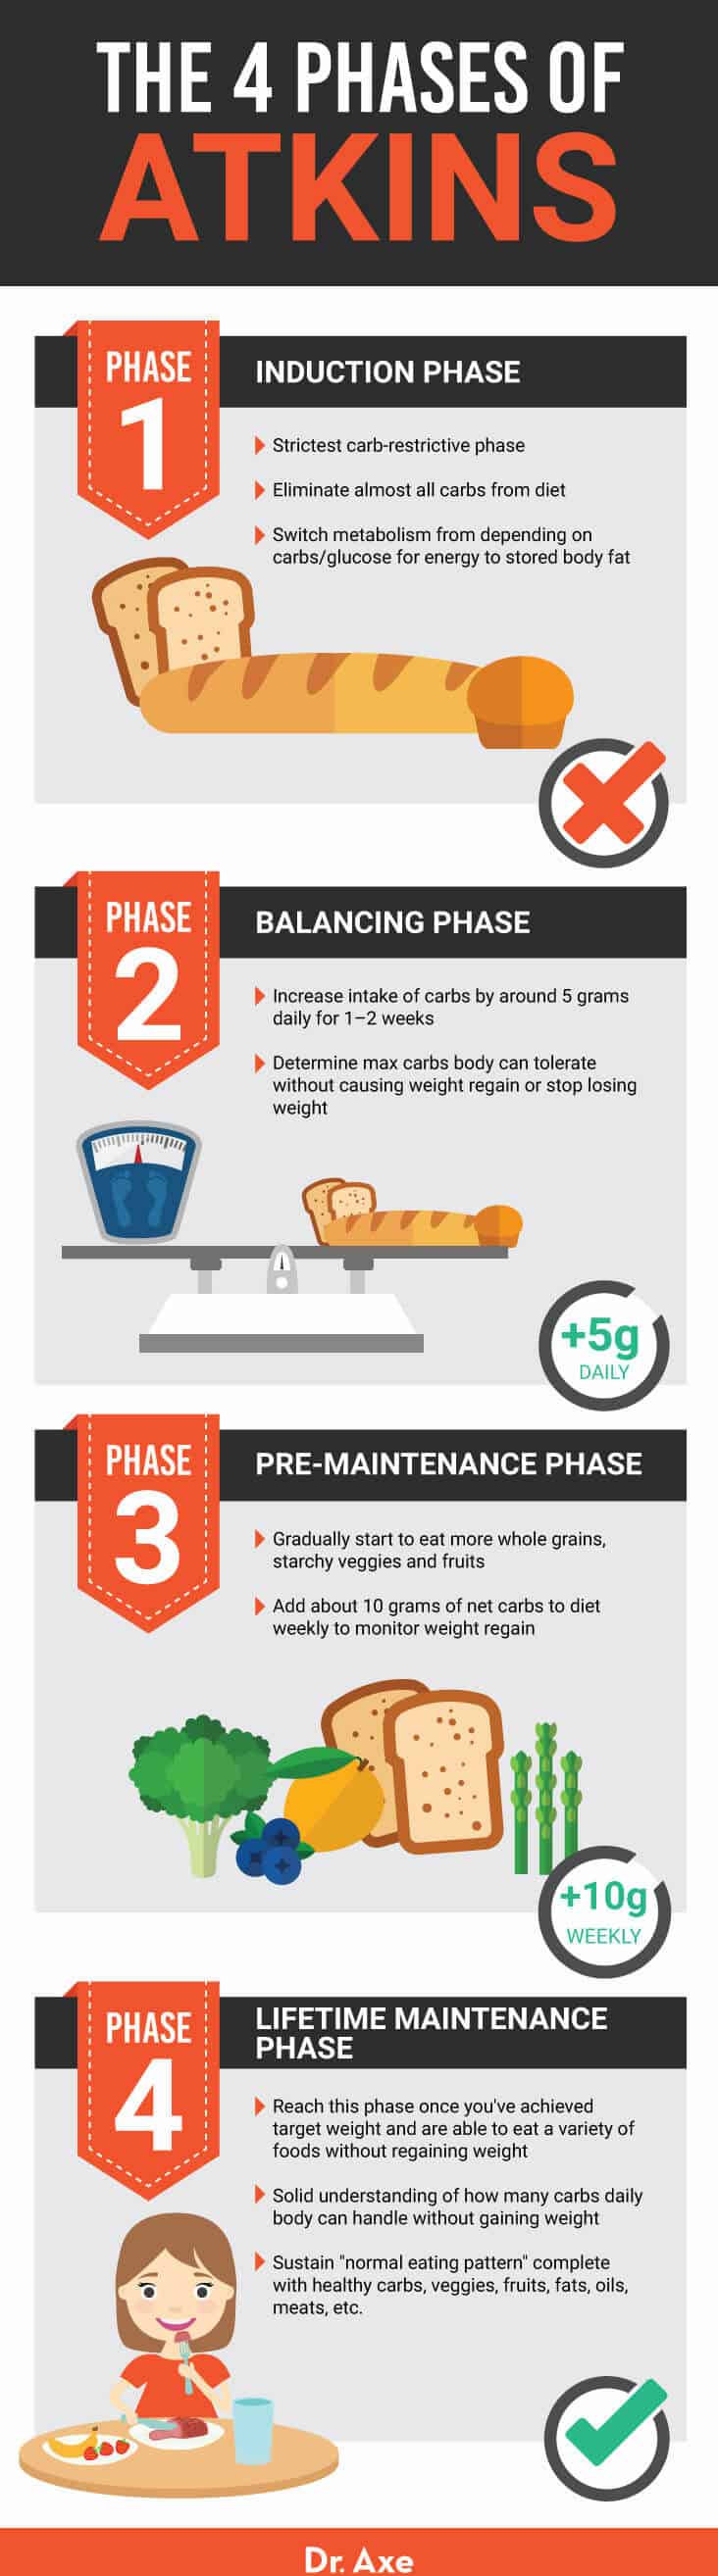 Four phases of the Atkins diet - Dr. Axe